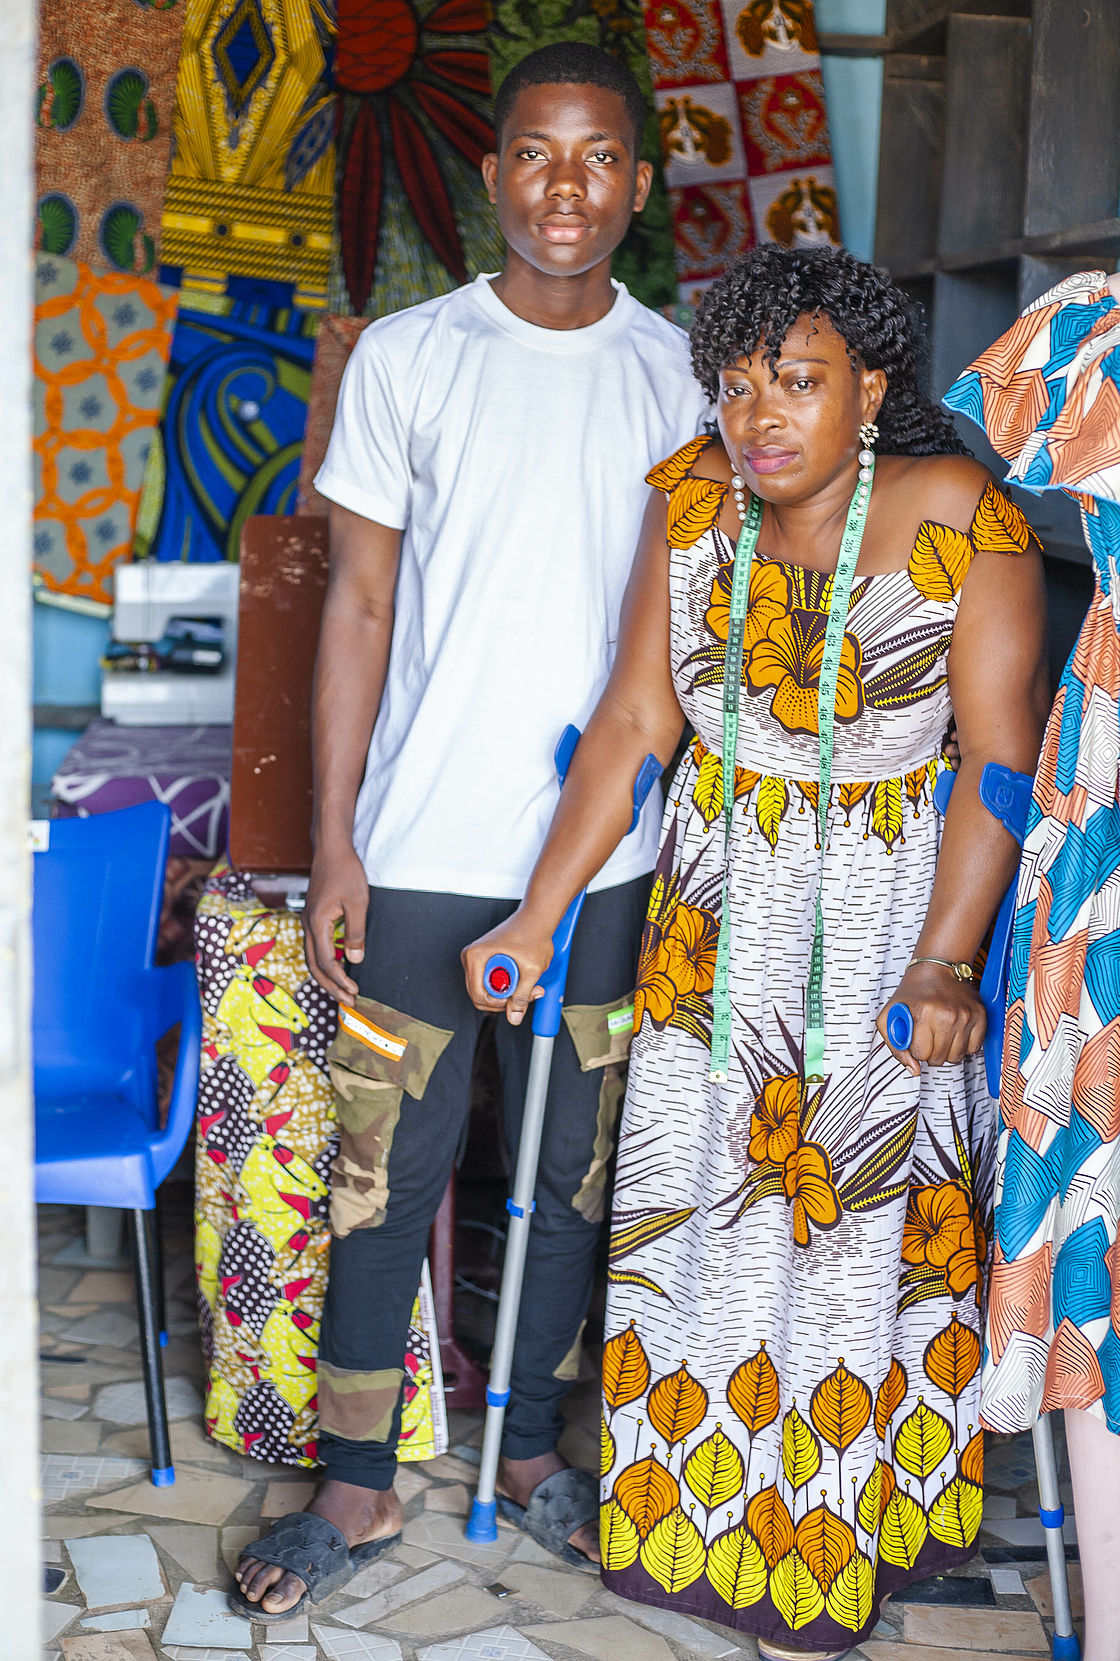 A woman standing with the support of walking stick is standing next to a young man, her son. Around them is colourful cloth in her shop